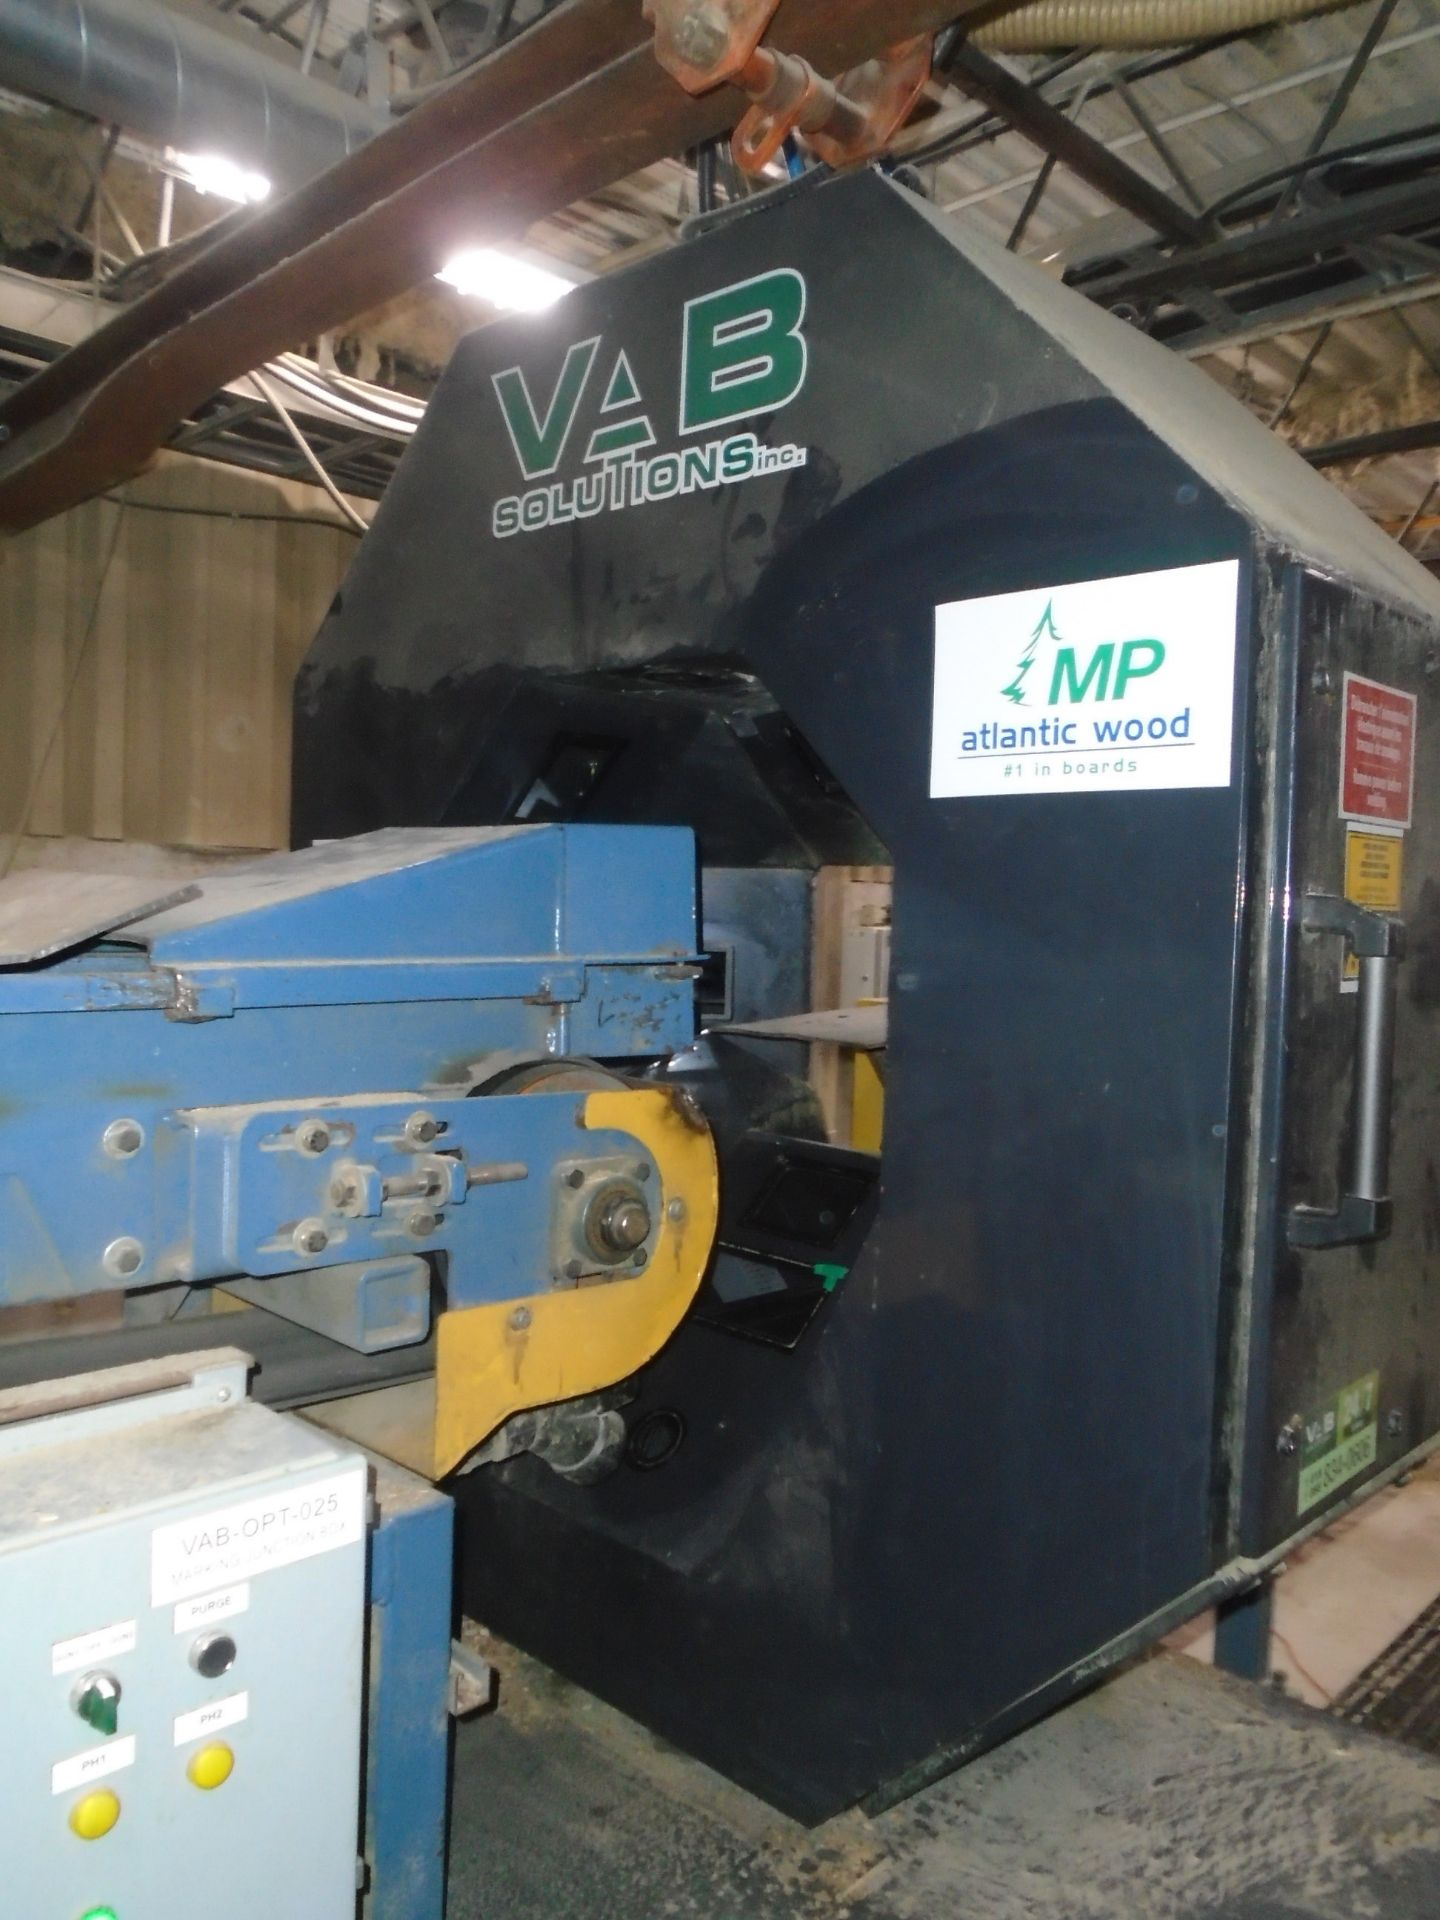 VAB SOLUTIONS (2015) LINEAR LUMBER GRADING SYSTEM WITH NORDSON 25B UV MARKING/READING UNIT, NEMA - Image 4 of 17